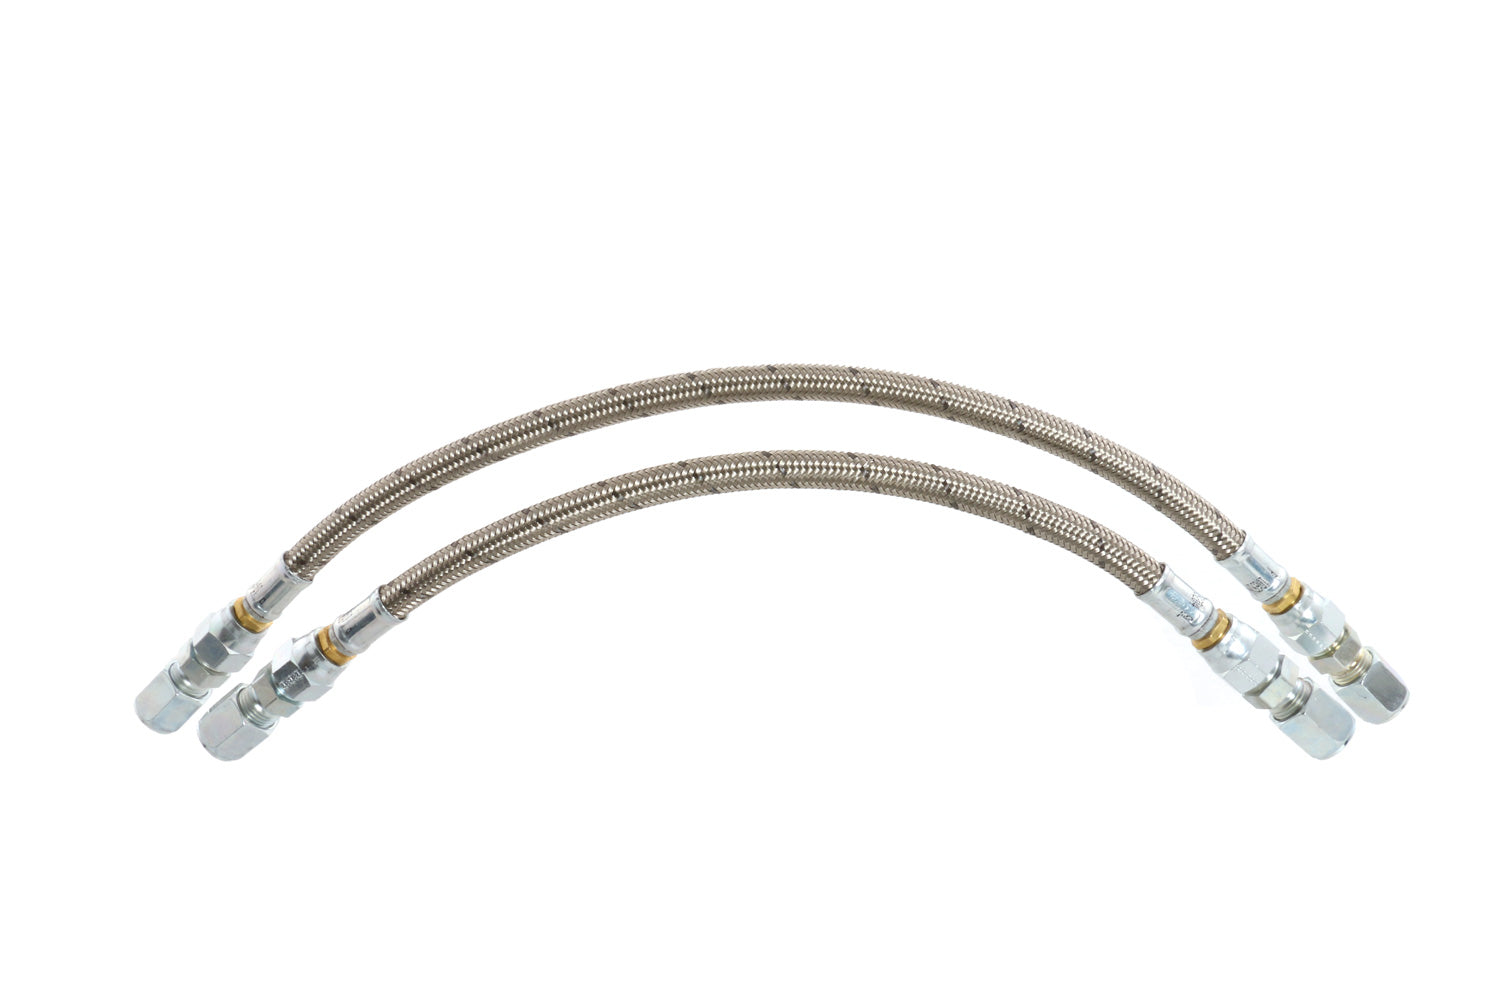 Deviant 70500 Power Steering Lines, Fits 01-10 GM Duramax